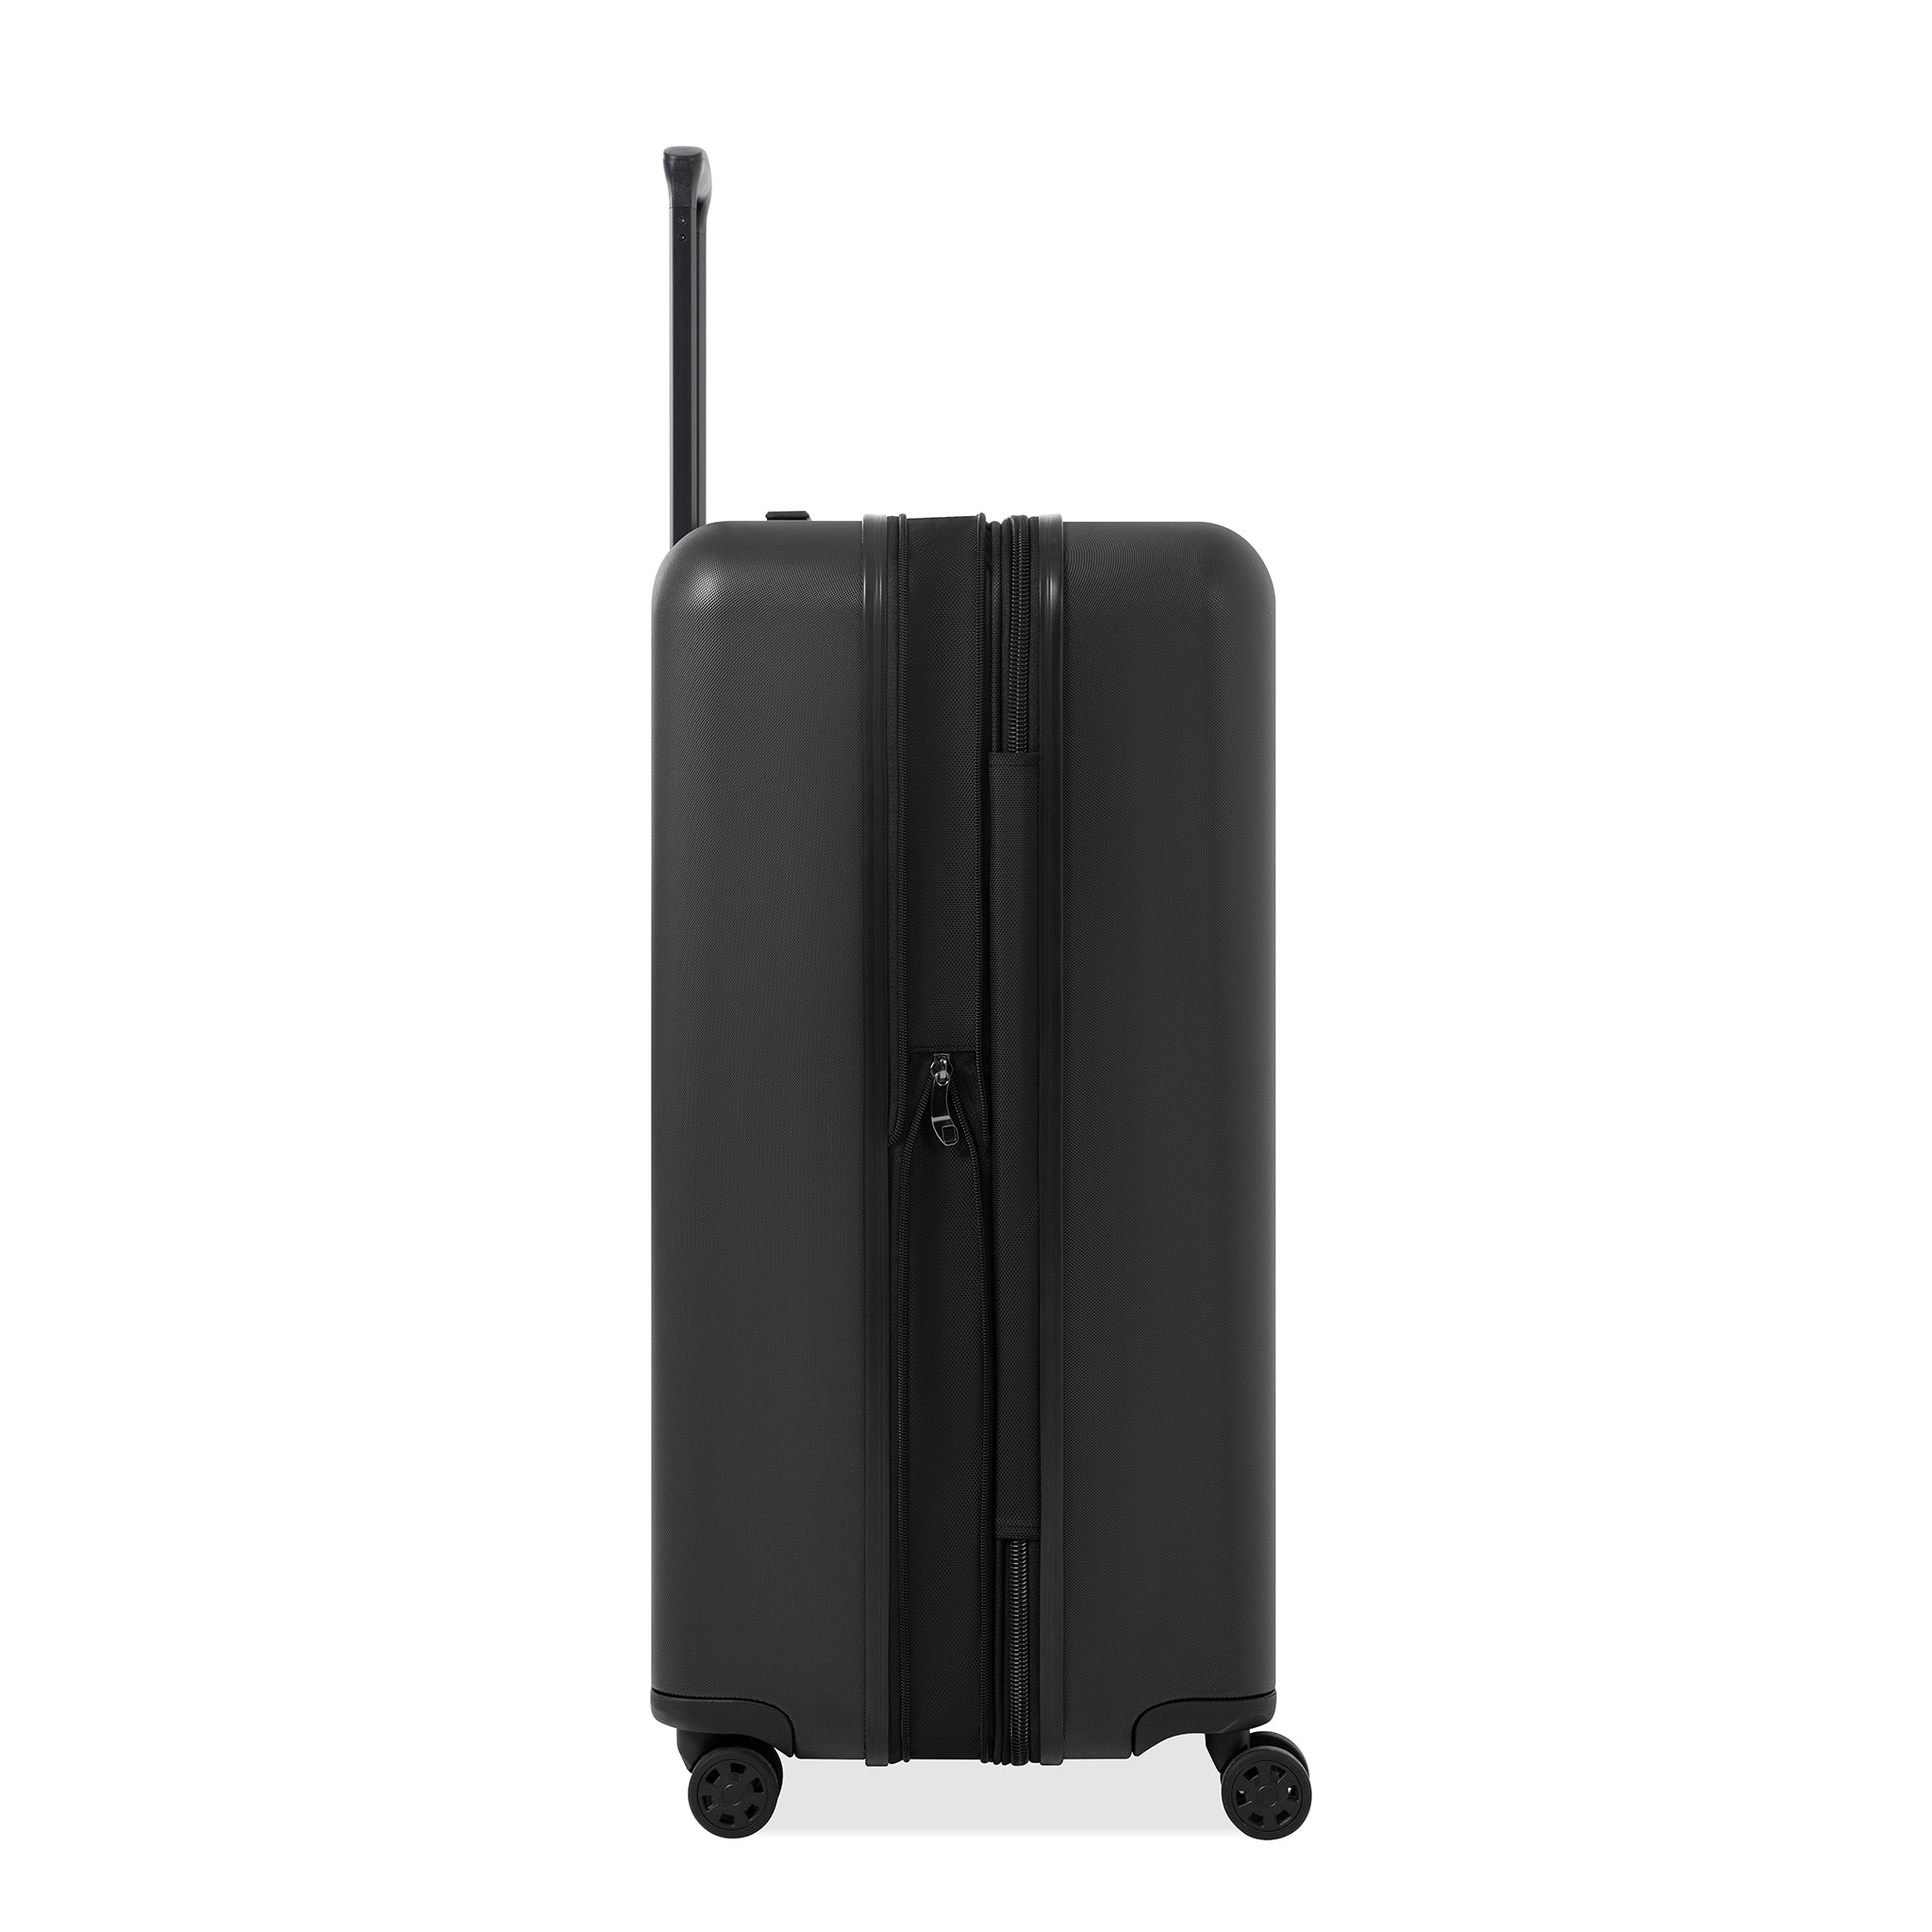 Side view of Sherpani hard-shell carry-on luggage, the Meridian in Black. Meridian features include a retractable luggage handle, uncrushable exterior, TSA-approved locking zippers and four 36-degree spinner wheels. 